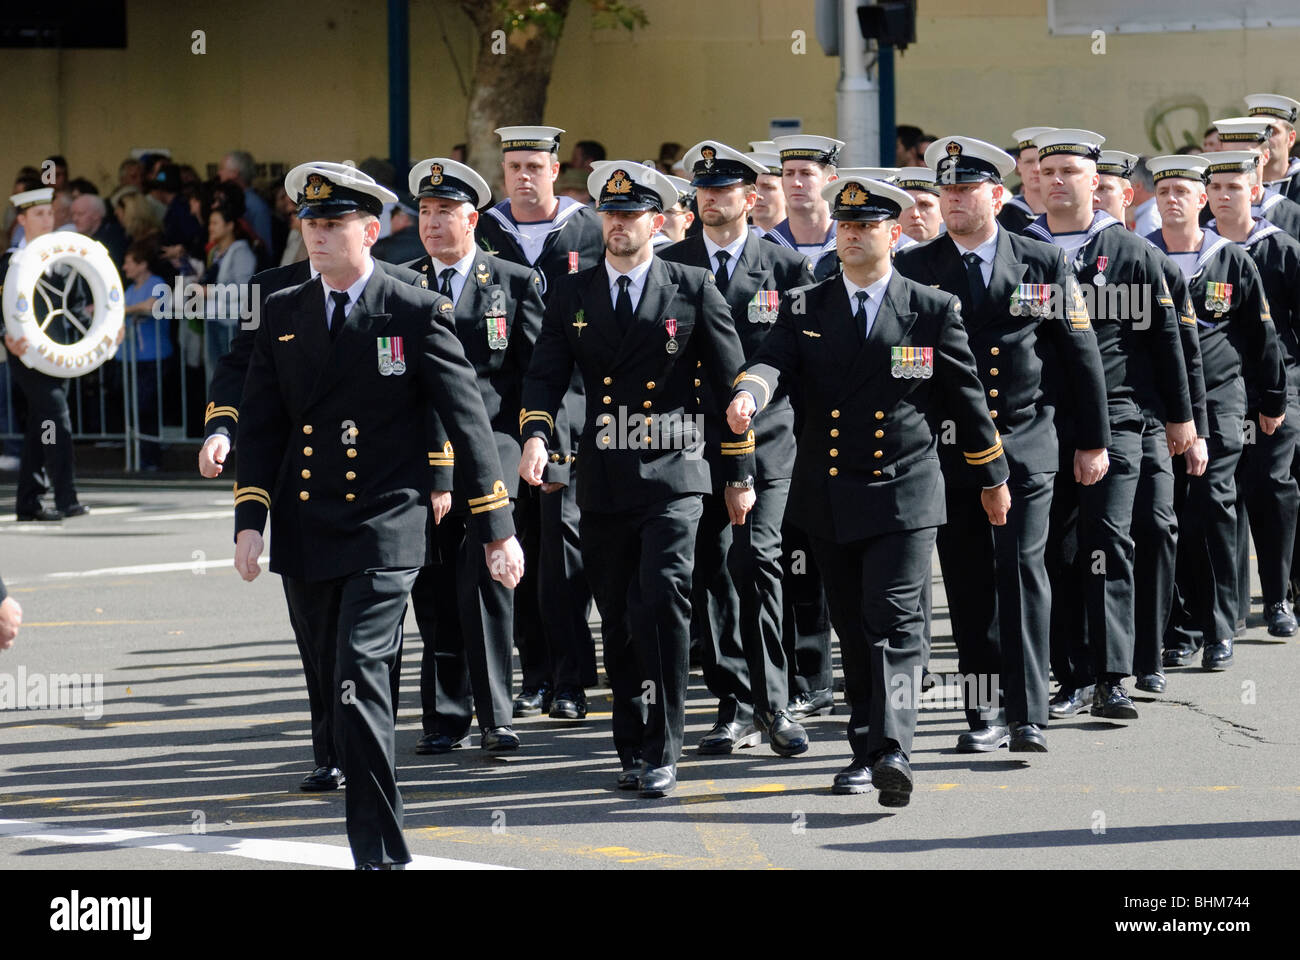 Sailors marching in uniform in the ANZAC day parade in Sydney, Australia. Uniformed sailors marching; military parade; Australia ANZAC Day; ANZACs Stock Photo